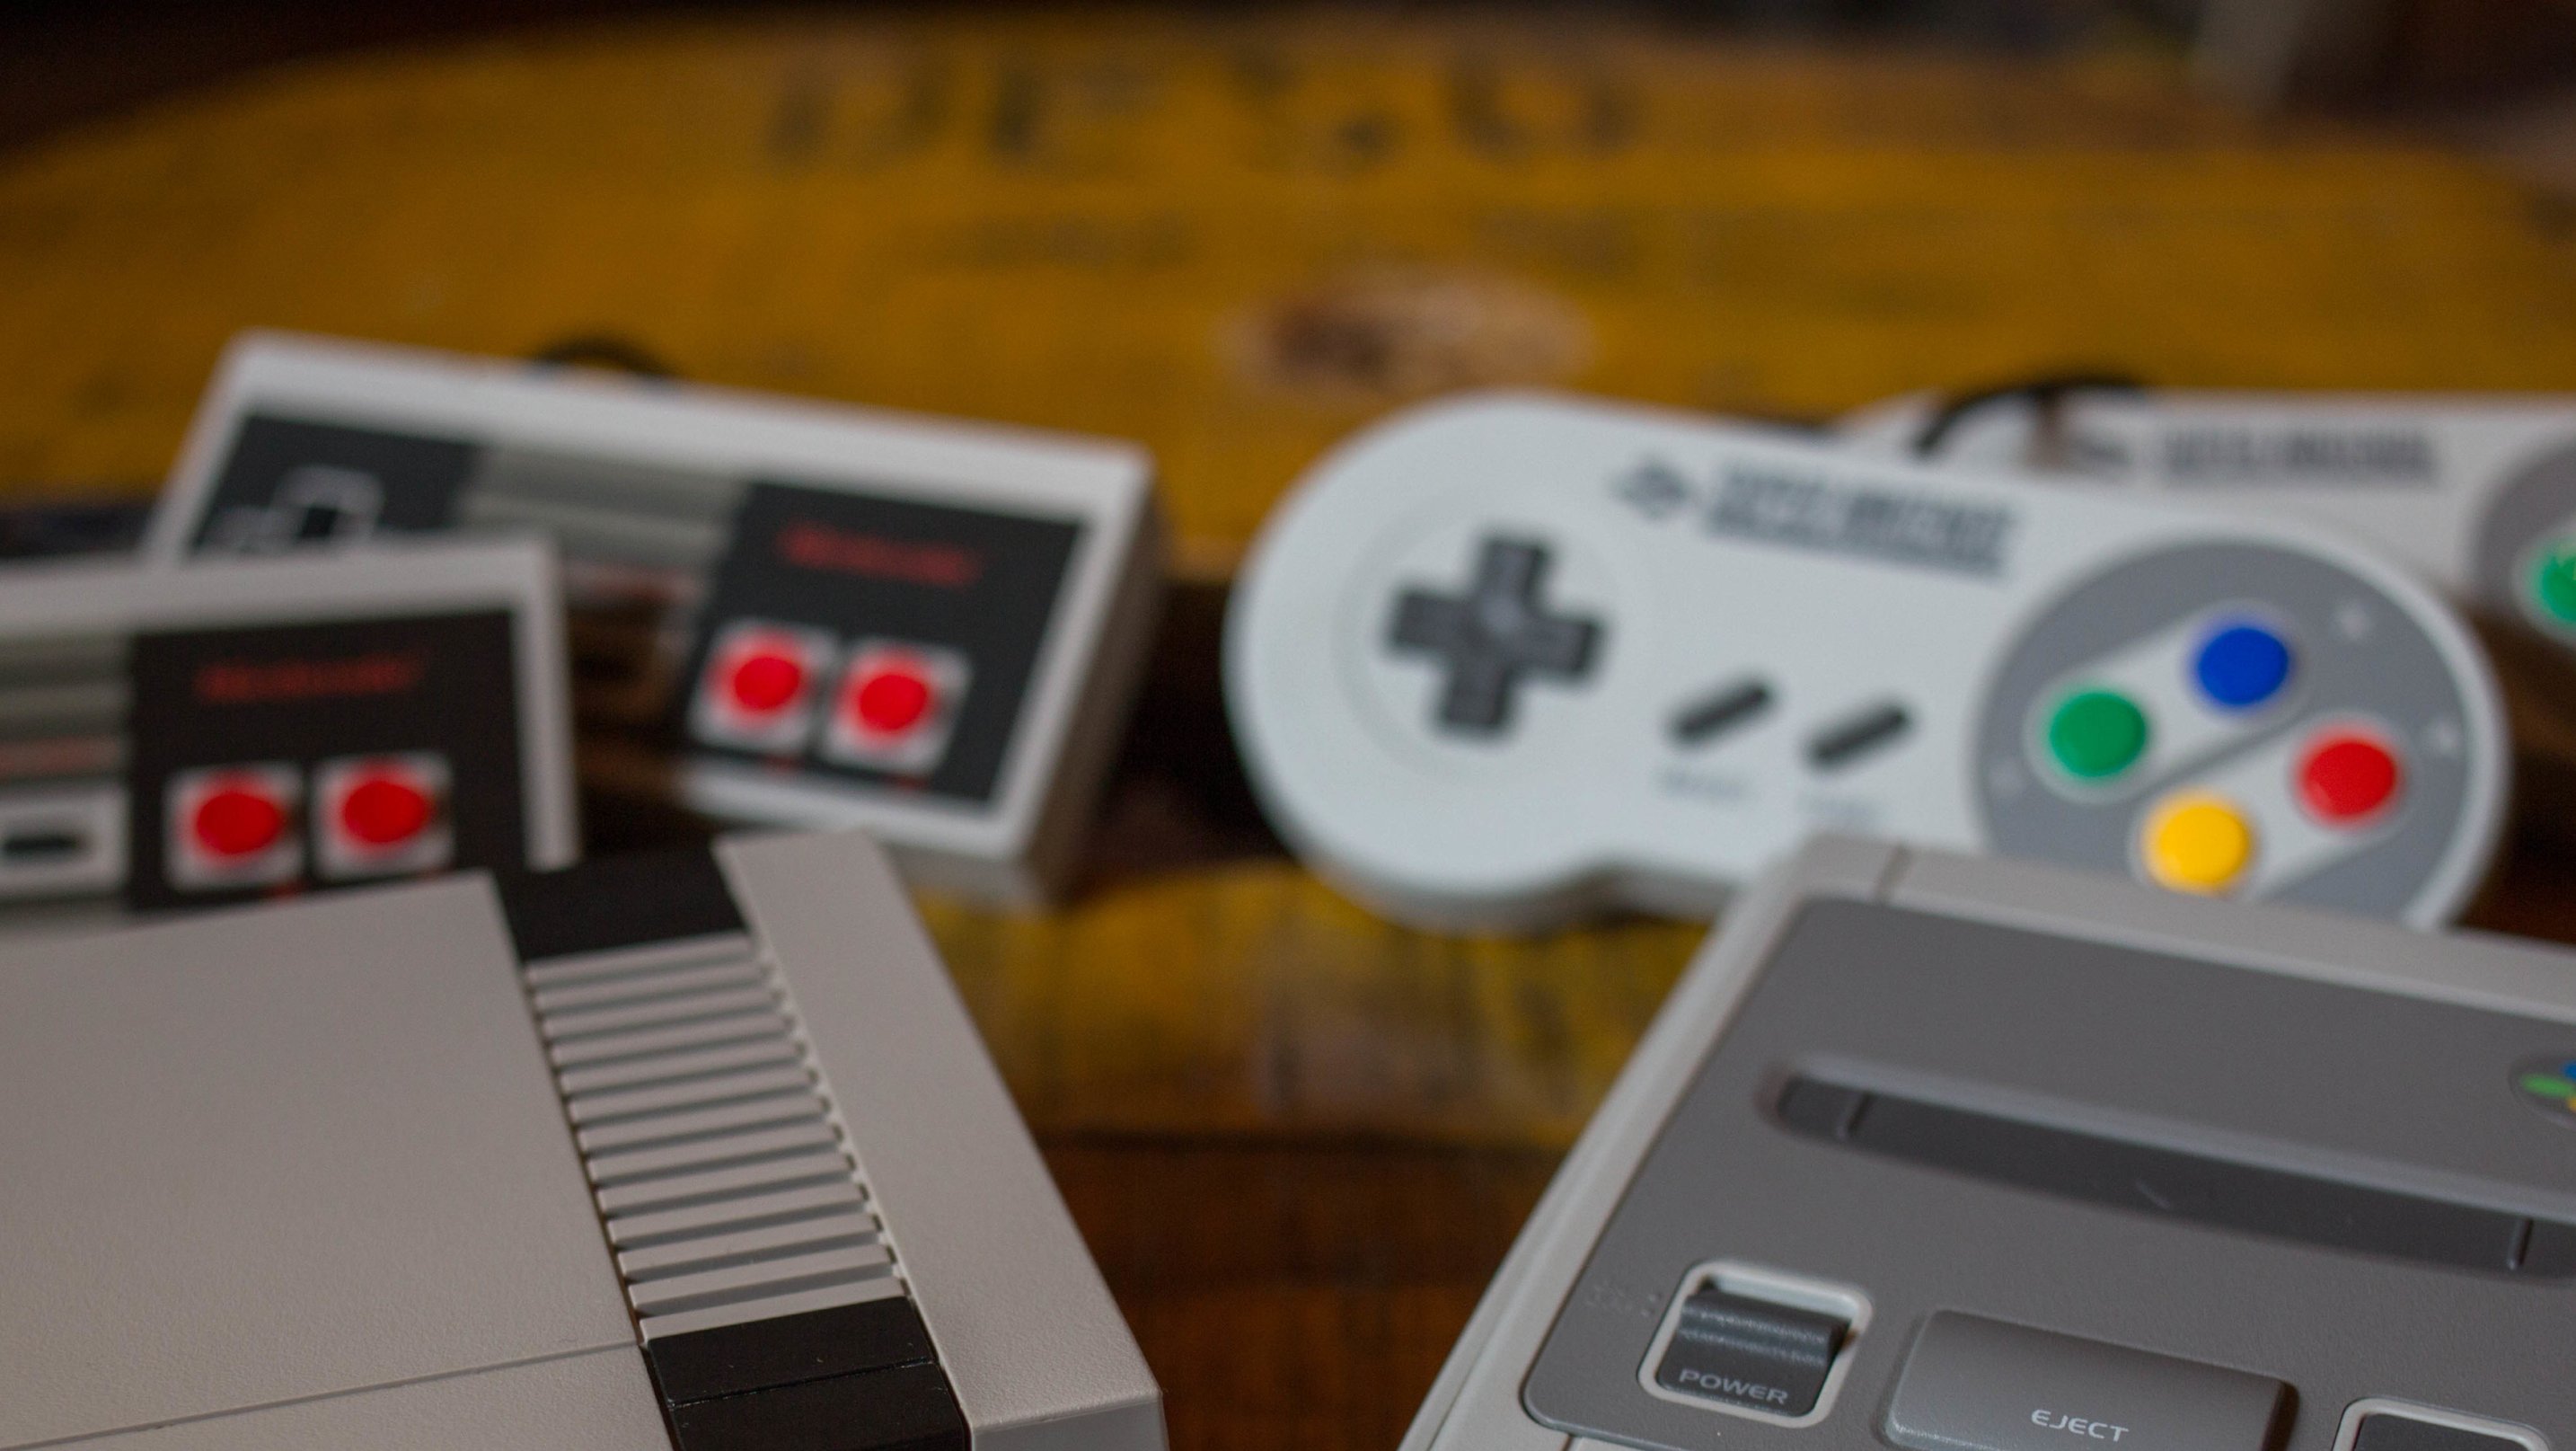 A NES (Nintendo Entertainment System) Classic Mini (L) and a